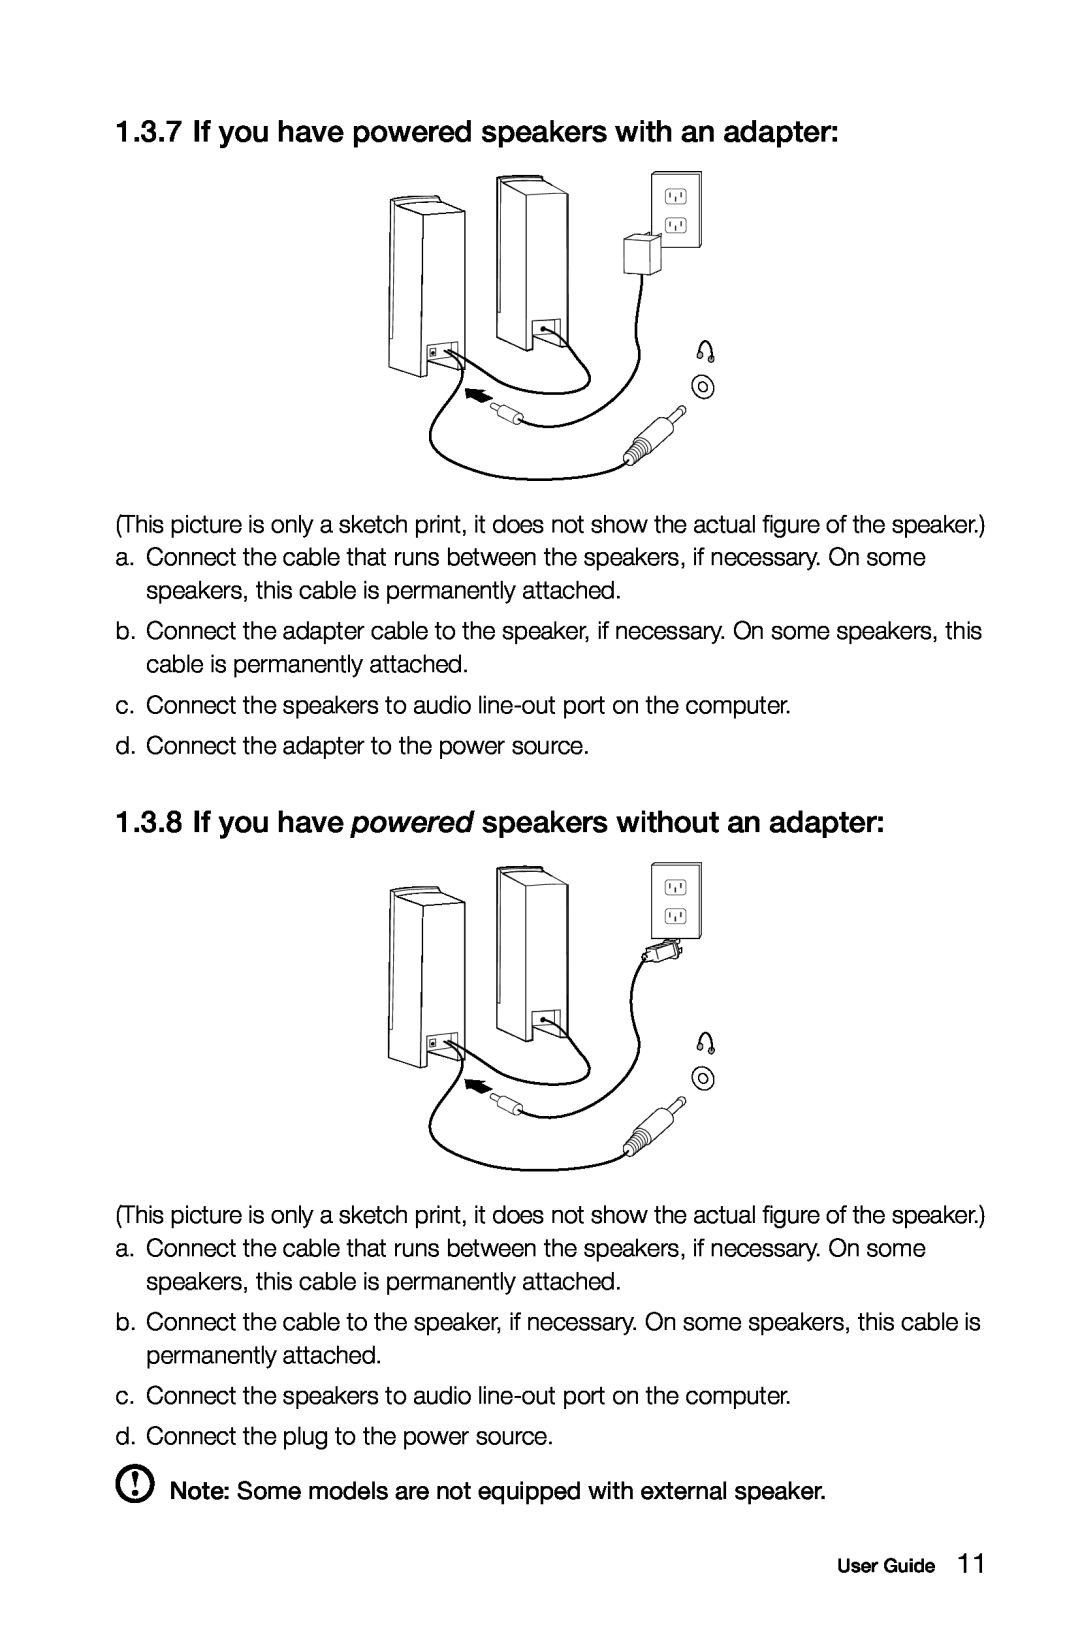 Lenovo 10068/7752 manual If you have powered speakers with an adapter, If you have powered speakers without an adapter 